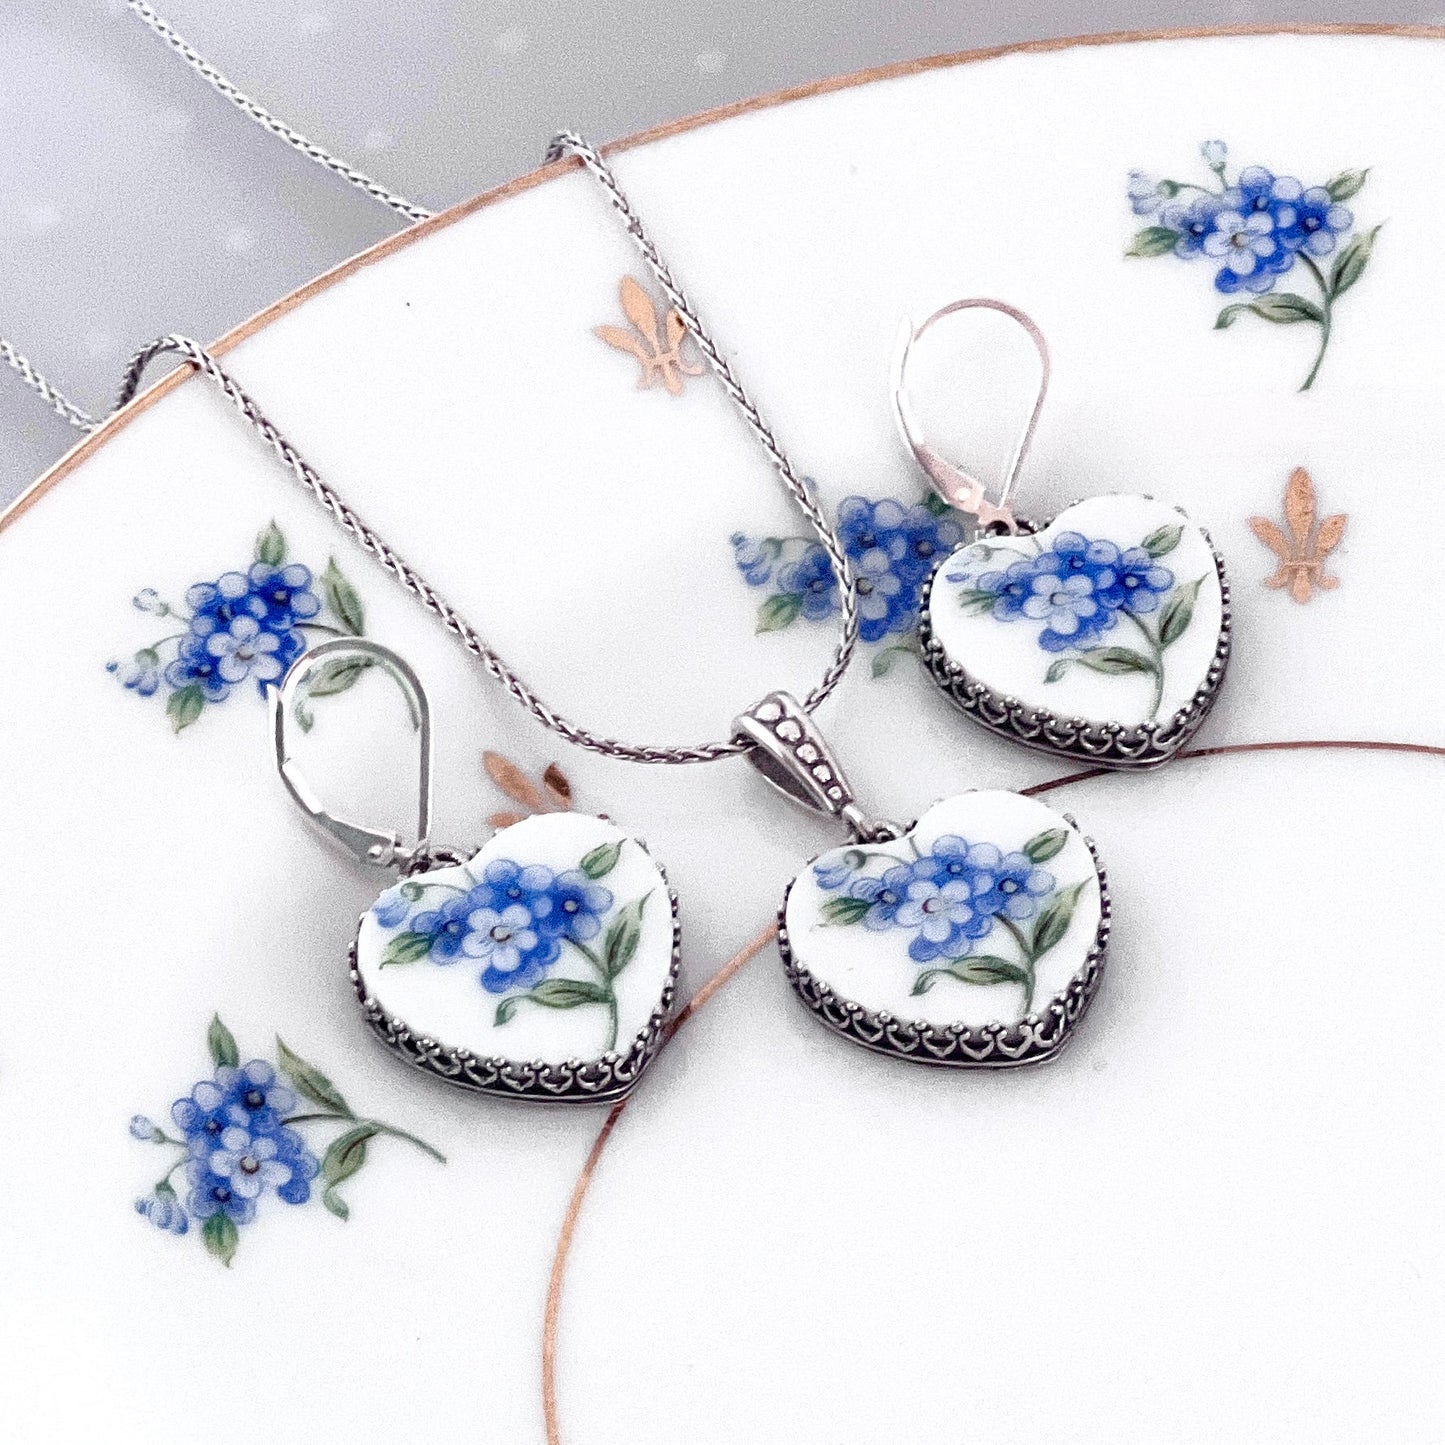 Forget Me Not China Jewelry Set, Romantic 20th Anniversary China Gift for Wife, Silver Necklace and Earrings, Gifts for Women